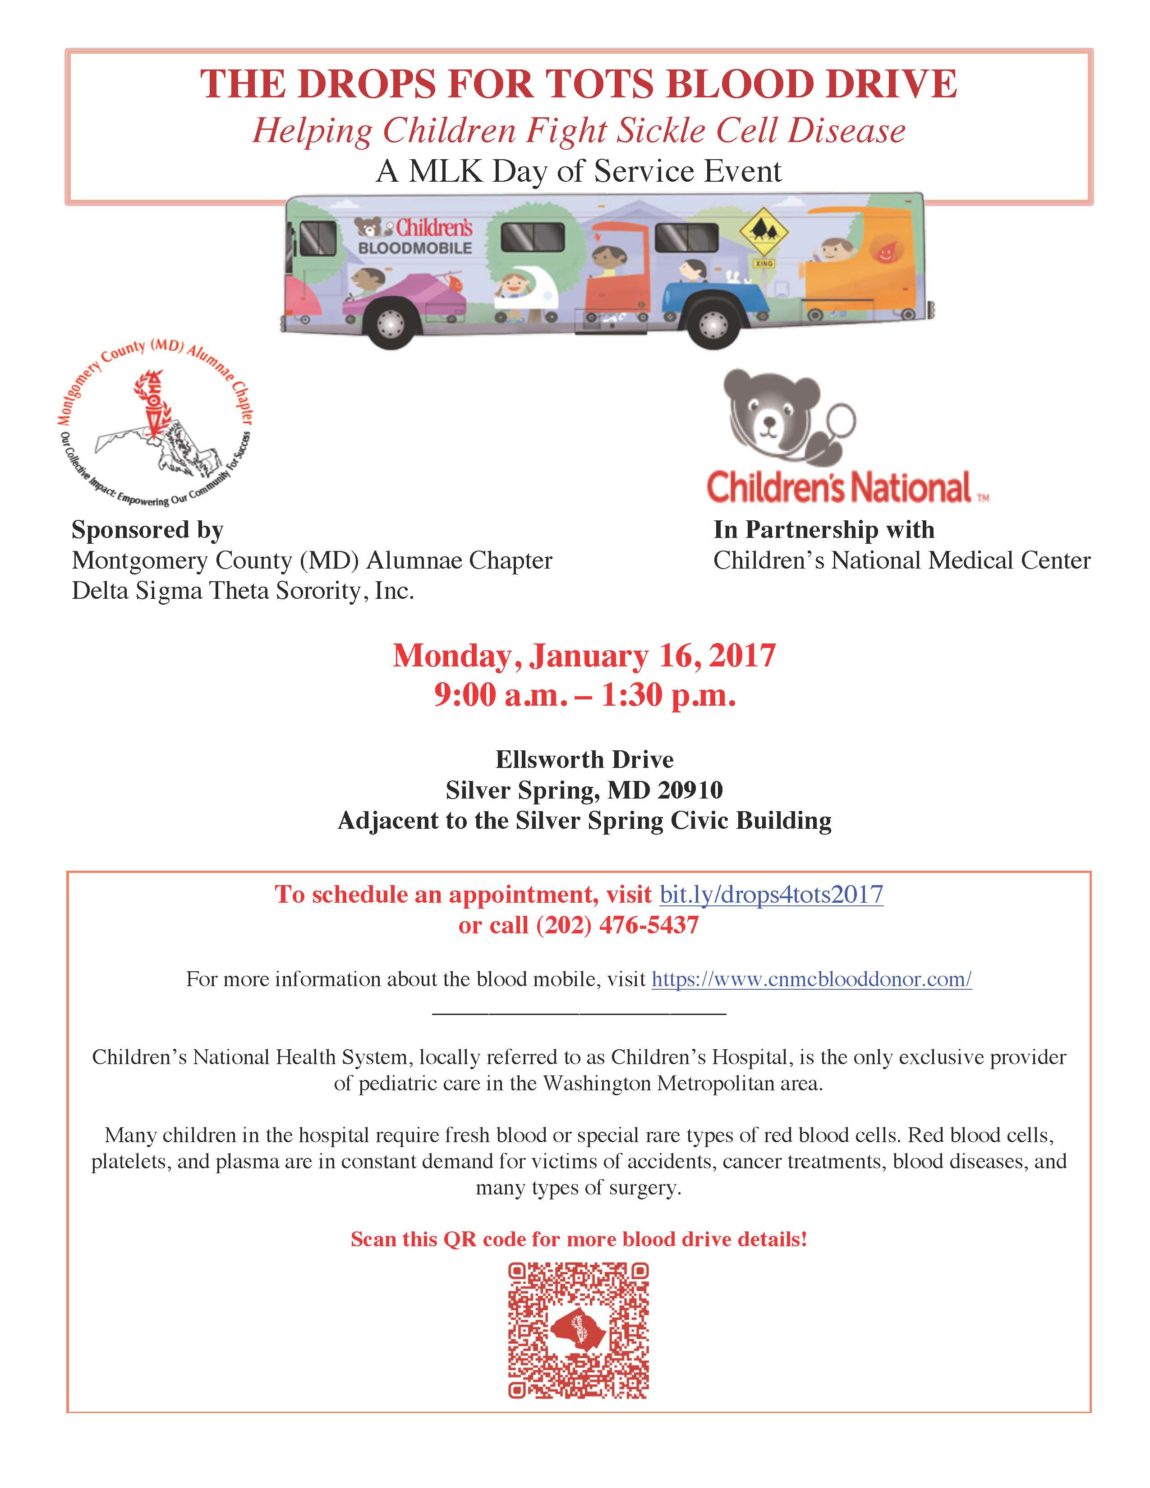 MCAC-Drops-for-Tots-Blood-Drive-Flyer-Revised.jpg